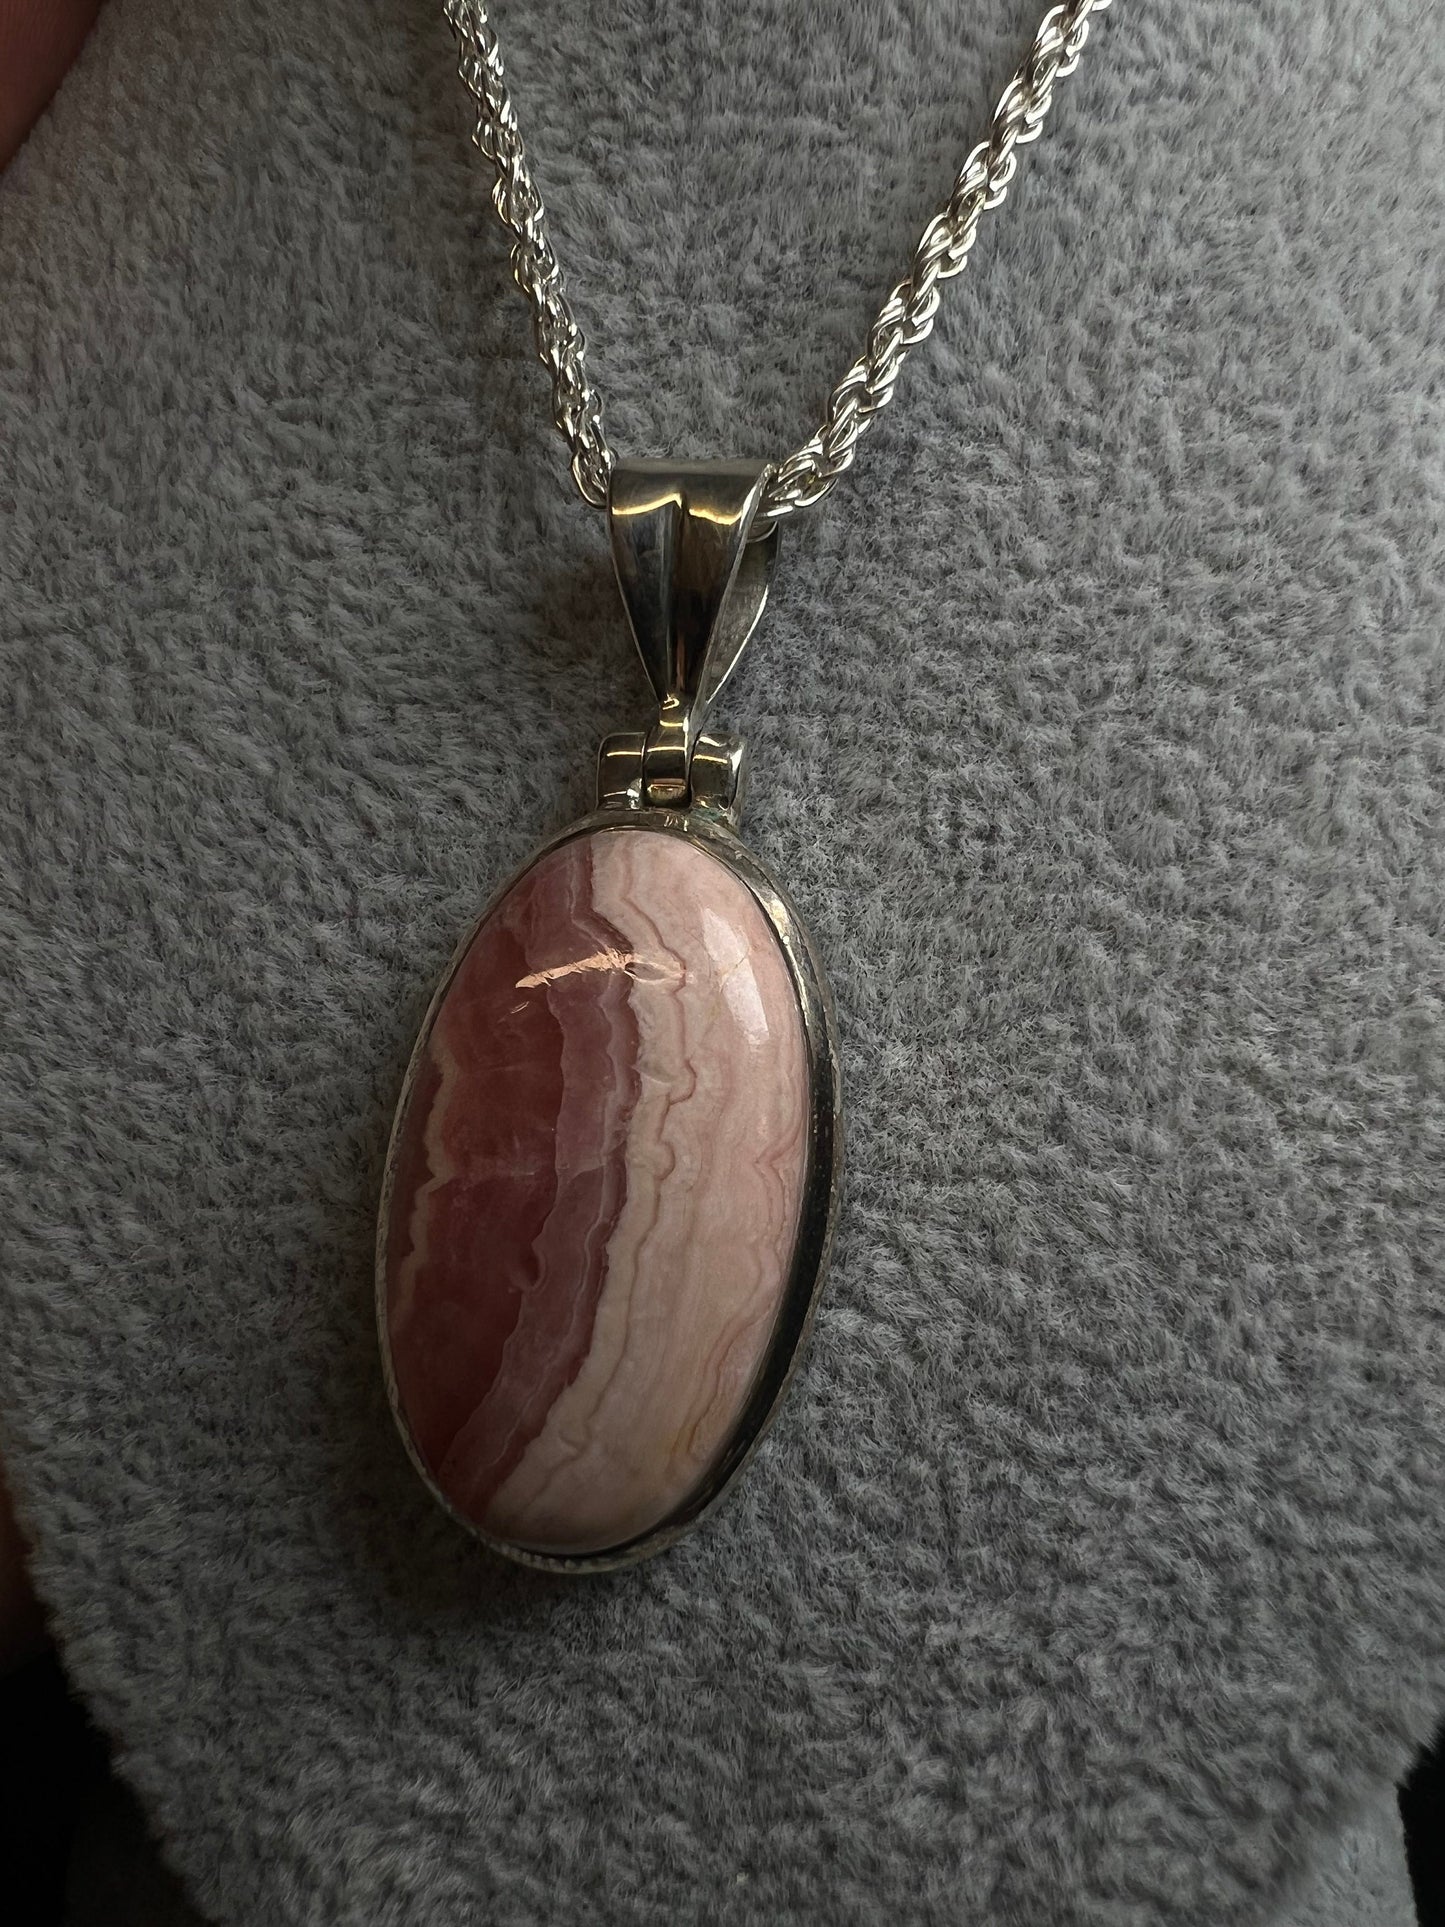 Rhodochrosite Pendant On A Silver Plated, Nickel Free, Rope Chain- Necklace, Jewellery, Gift, Crystal Healing, Statement Piece